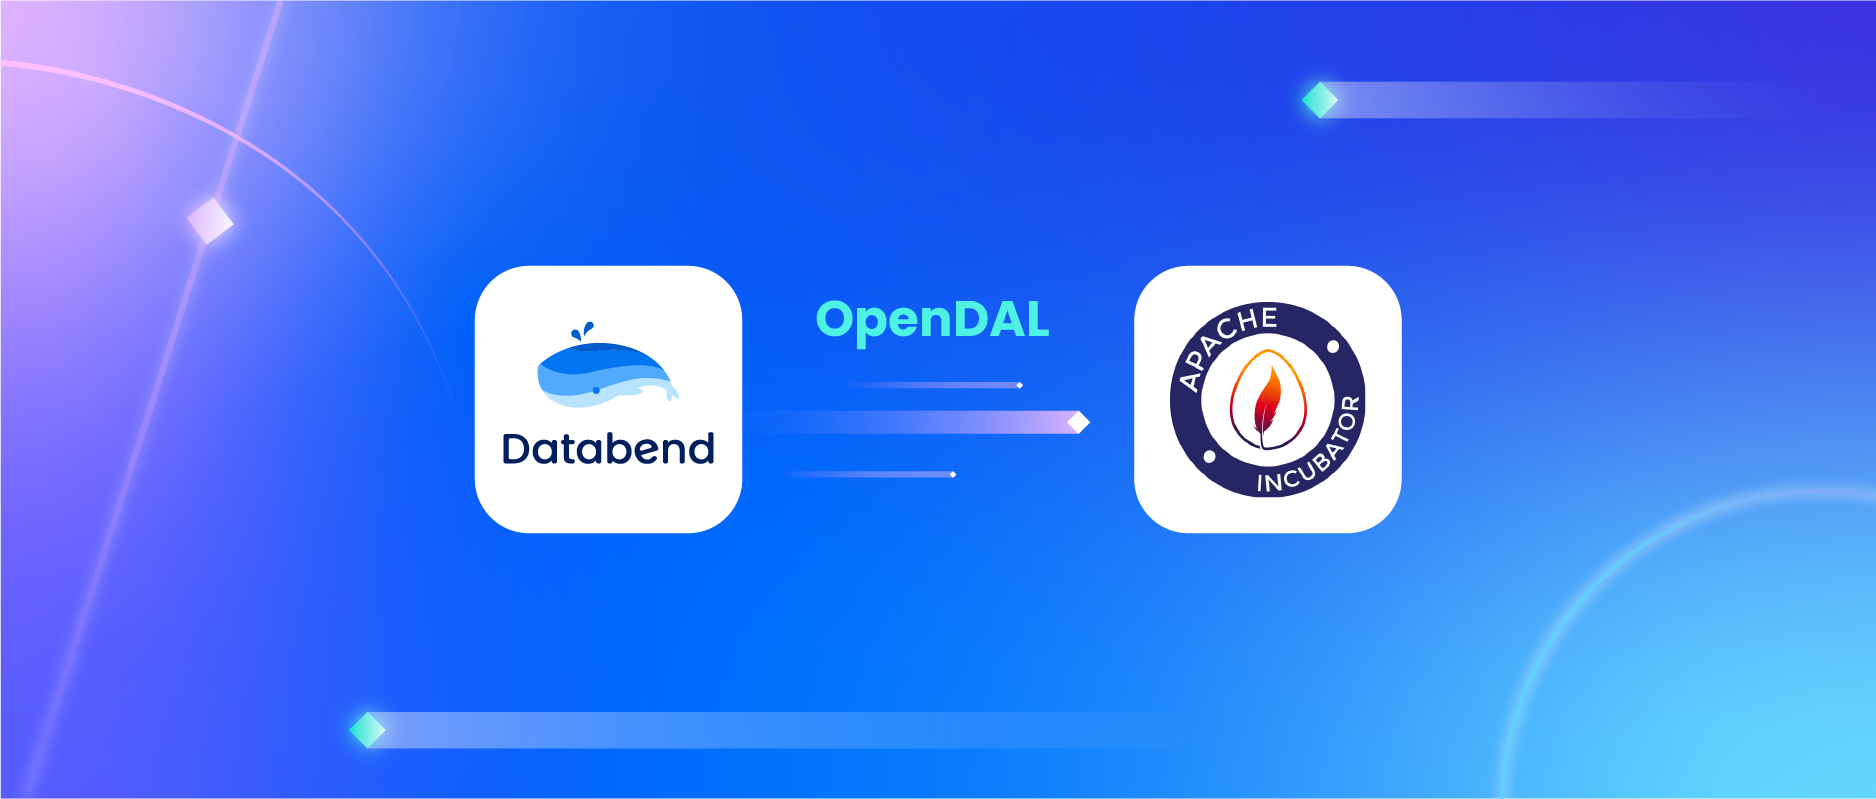 OpenDAL successfully entered Apache Incubator